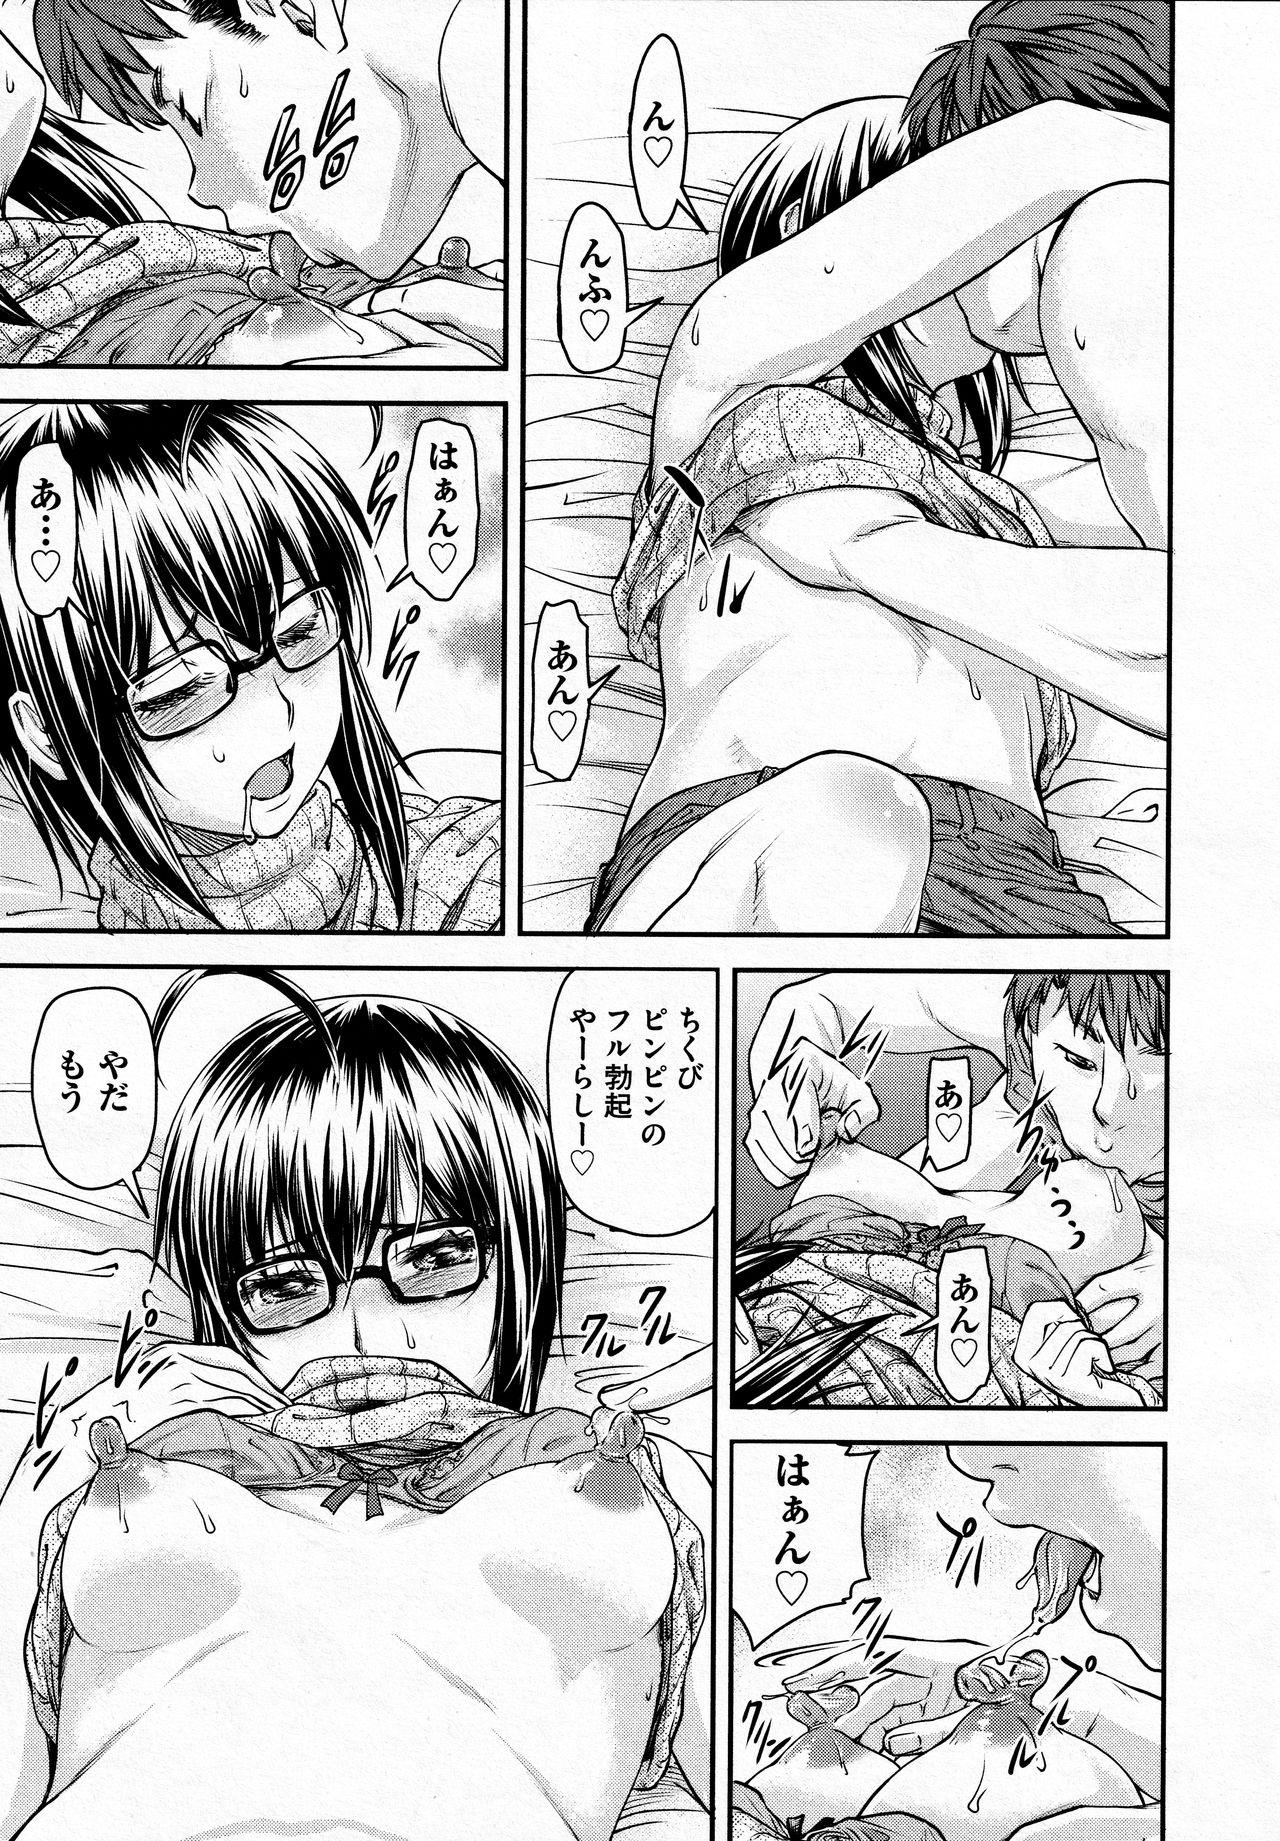 Soft Kaname Date #12 Black Hair - Page 7